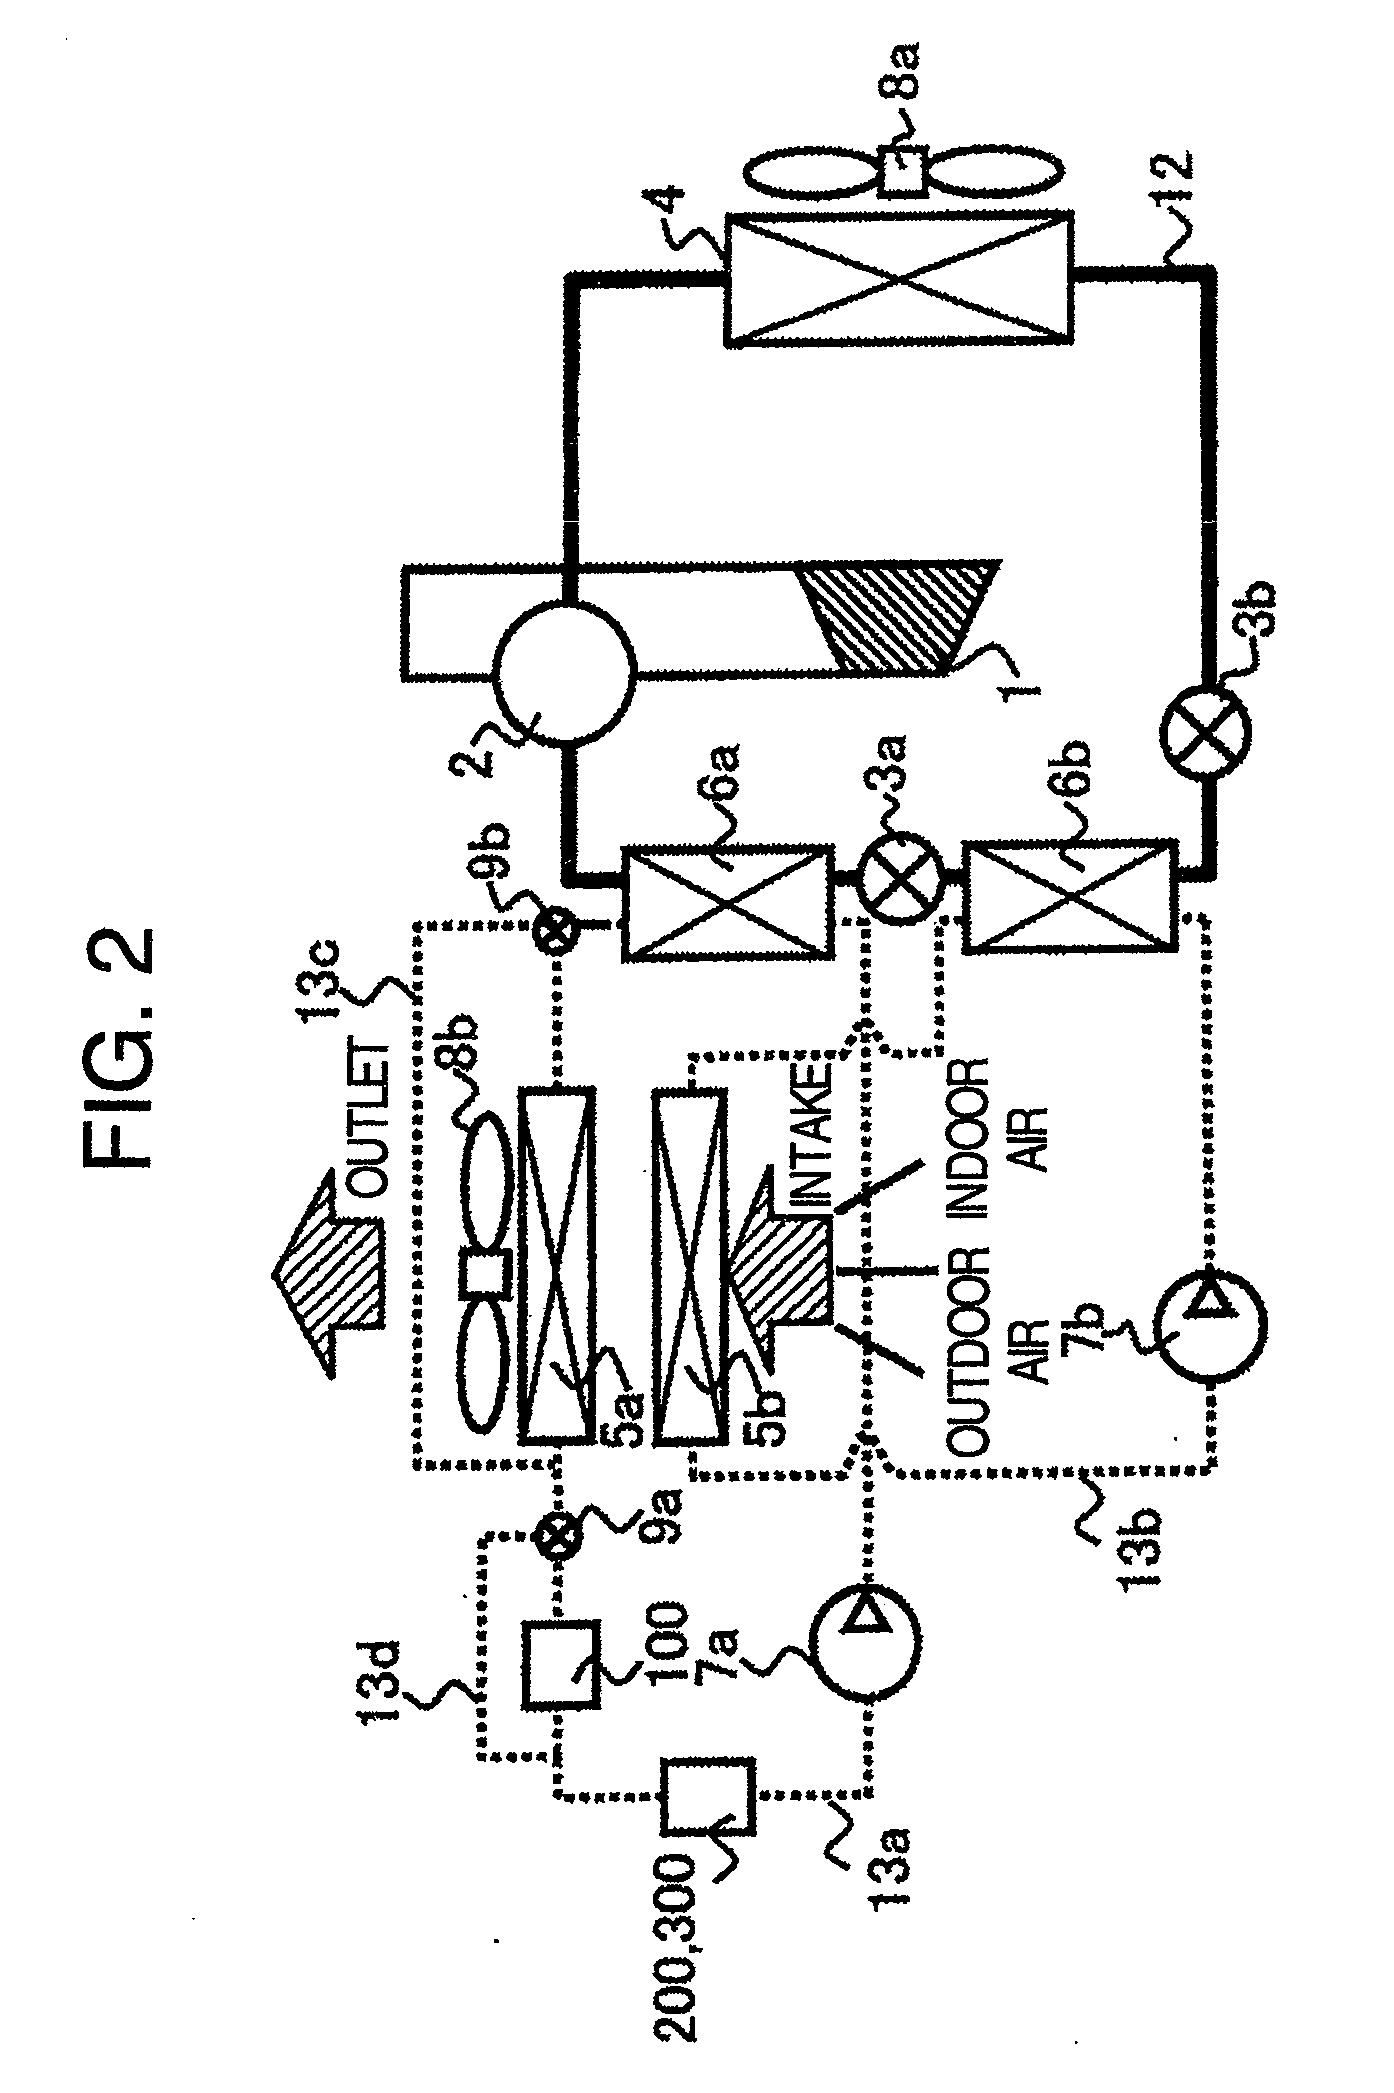 Thermodynamic cycle system for moving vehicle